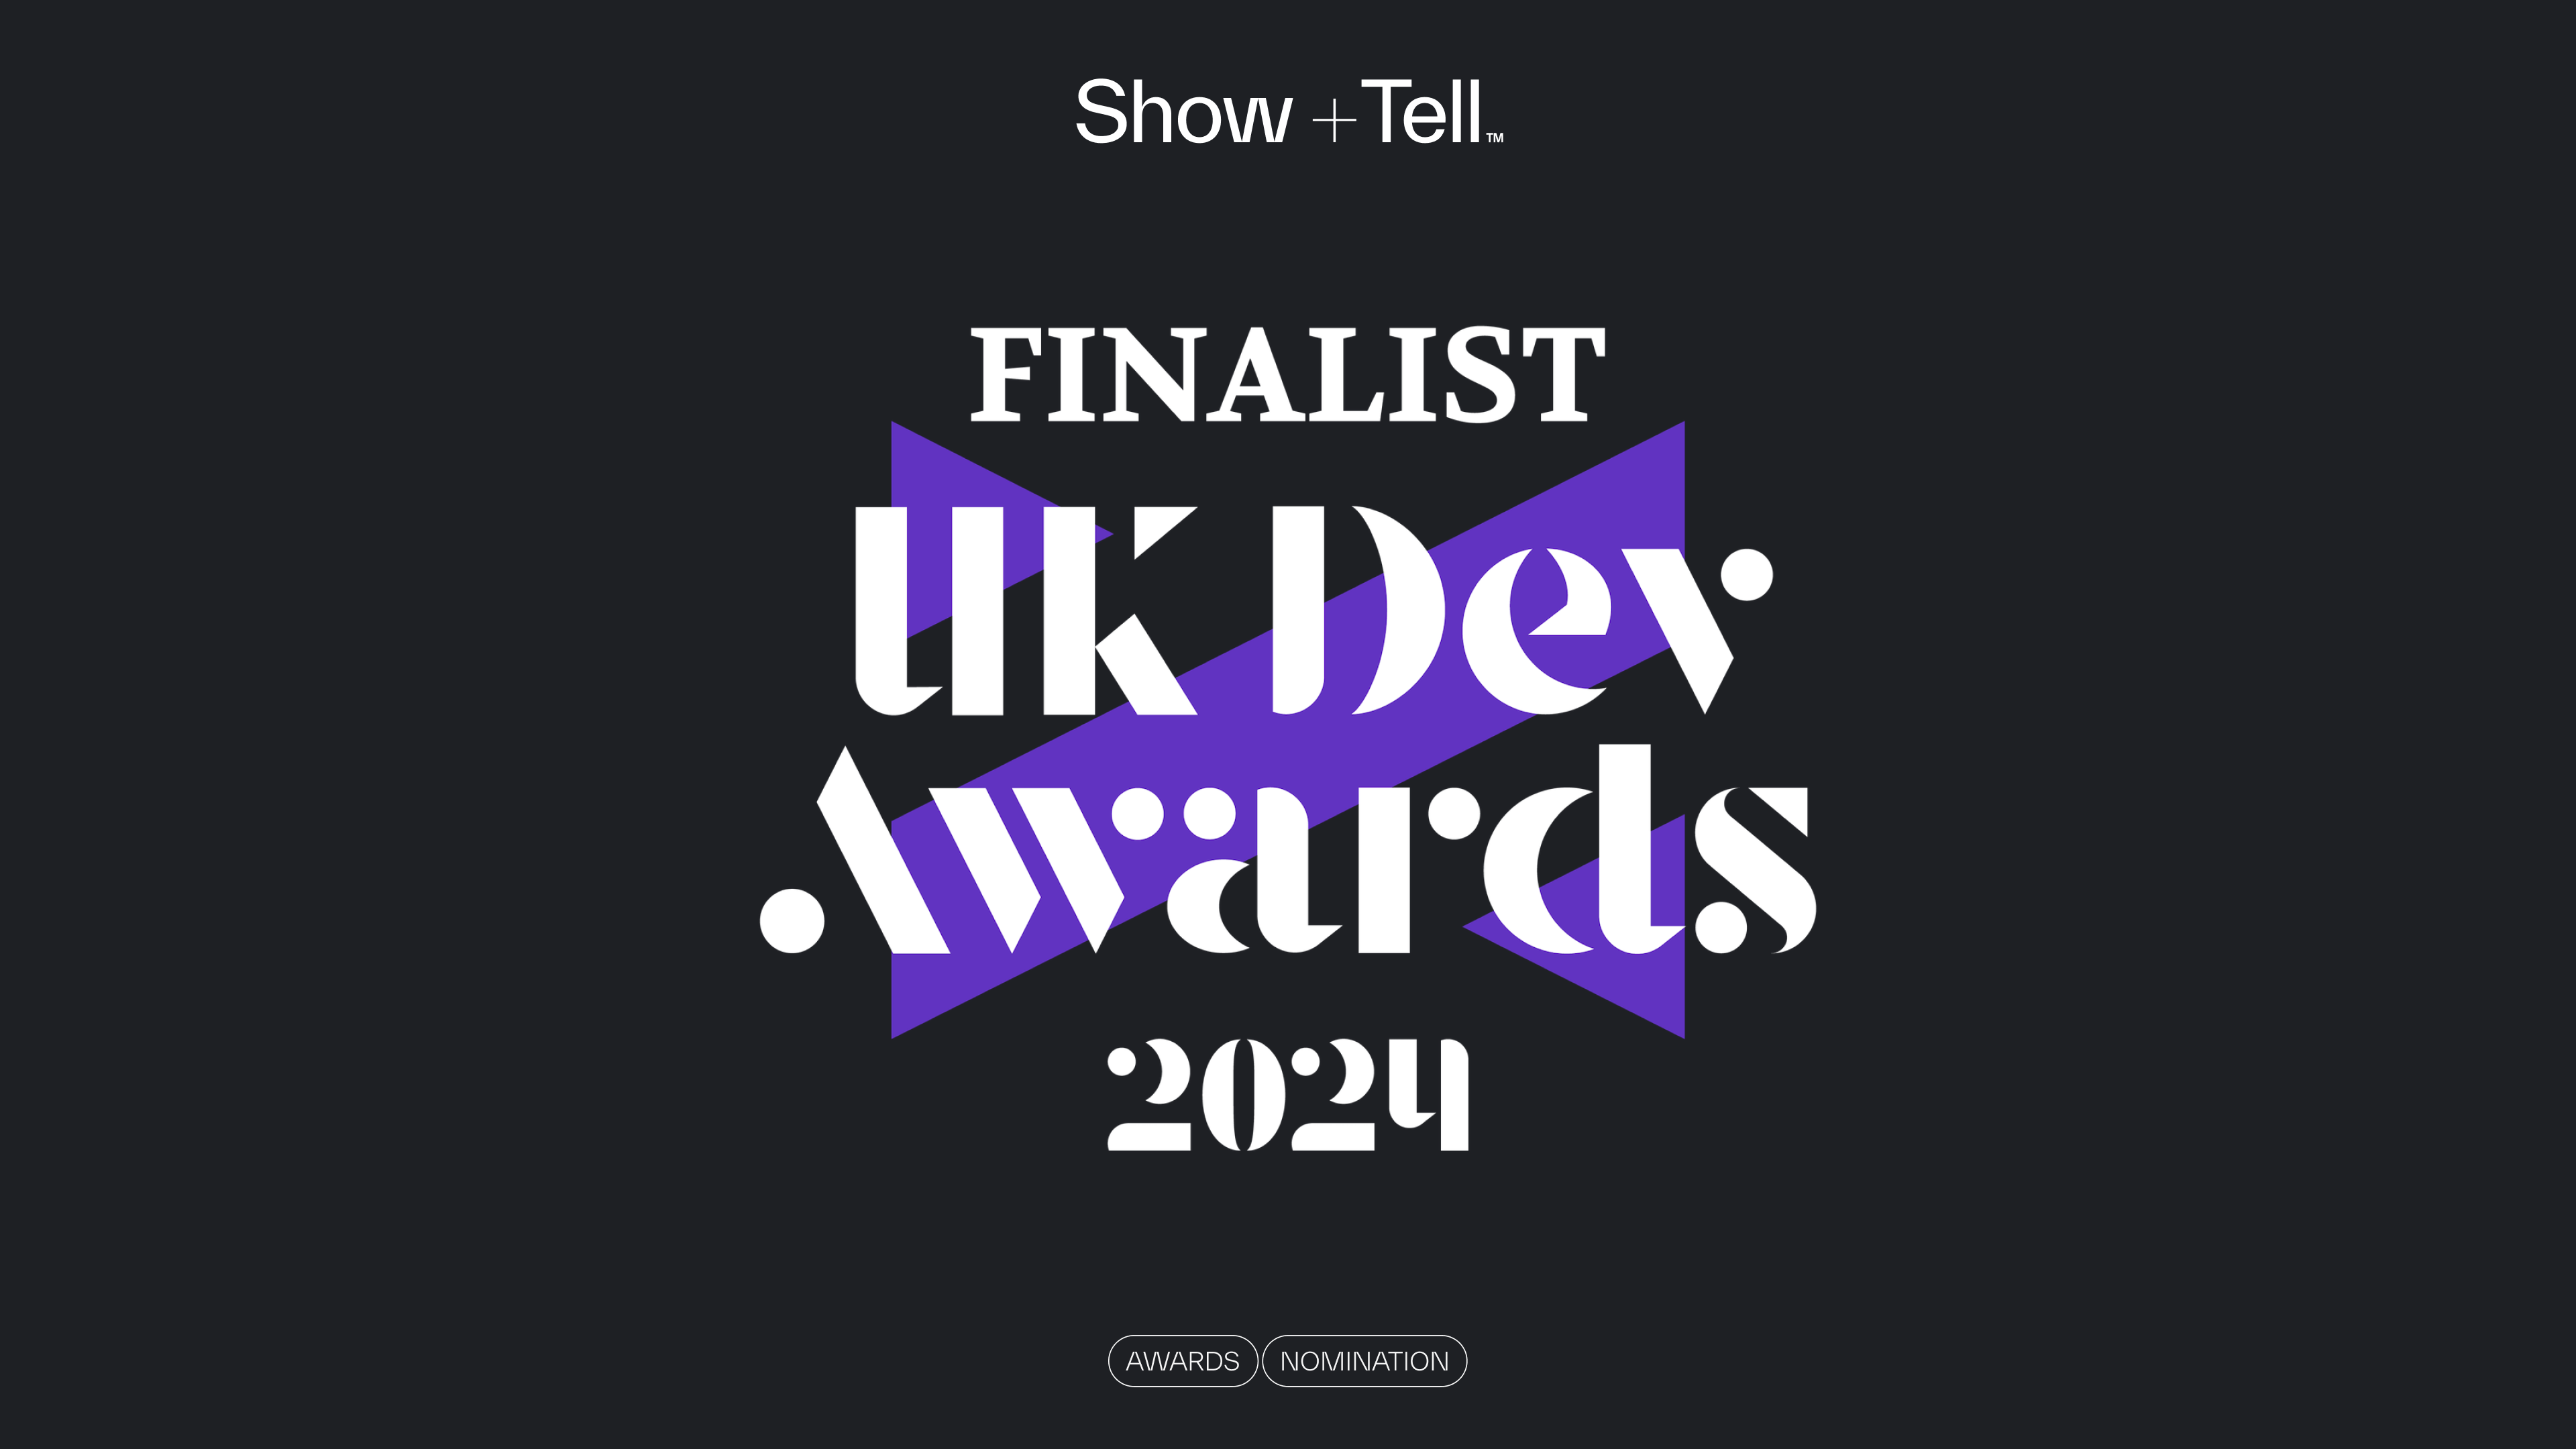 Show + Tell has been named as a Finalist in the UK Dev Awards 2024